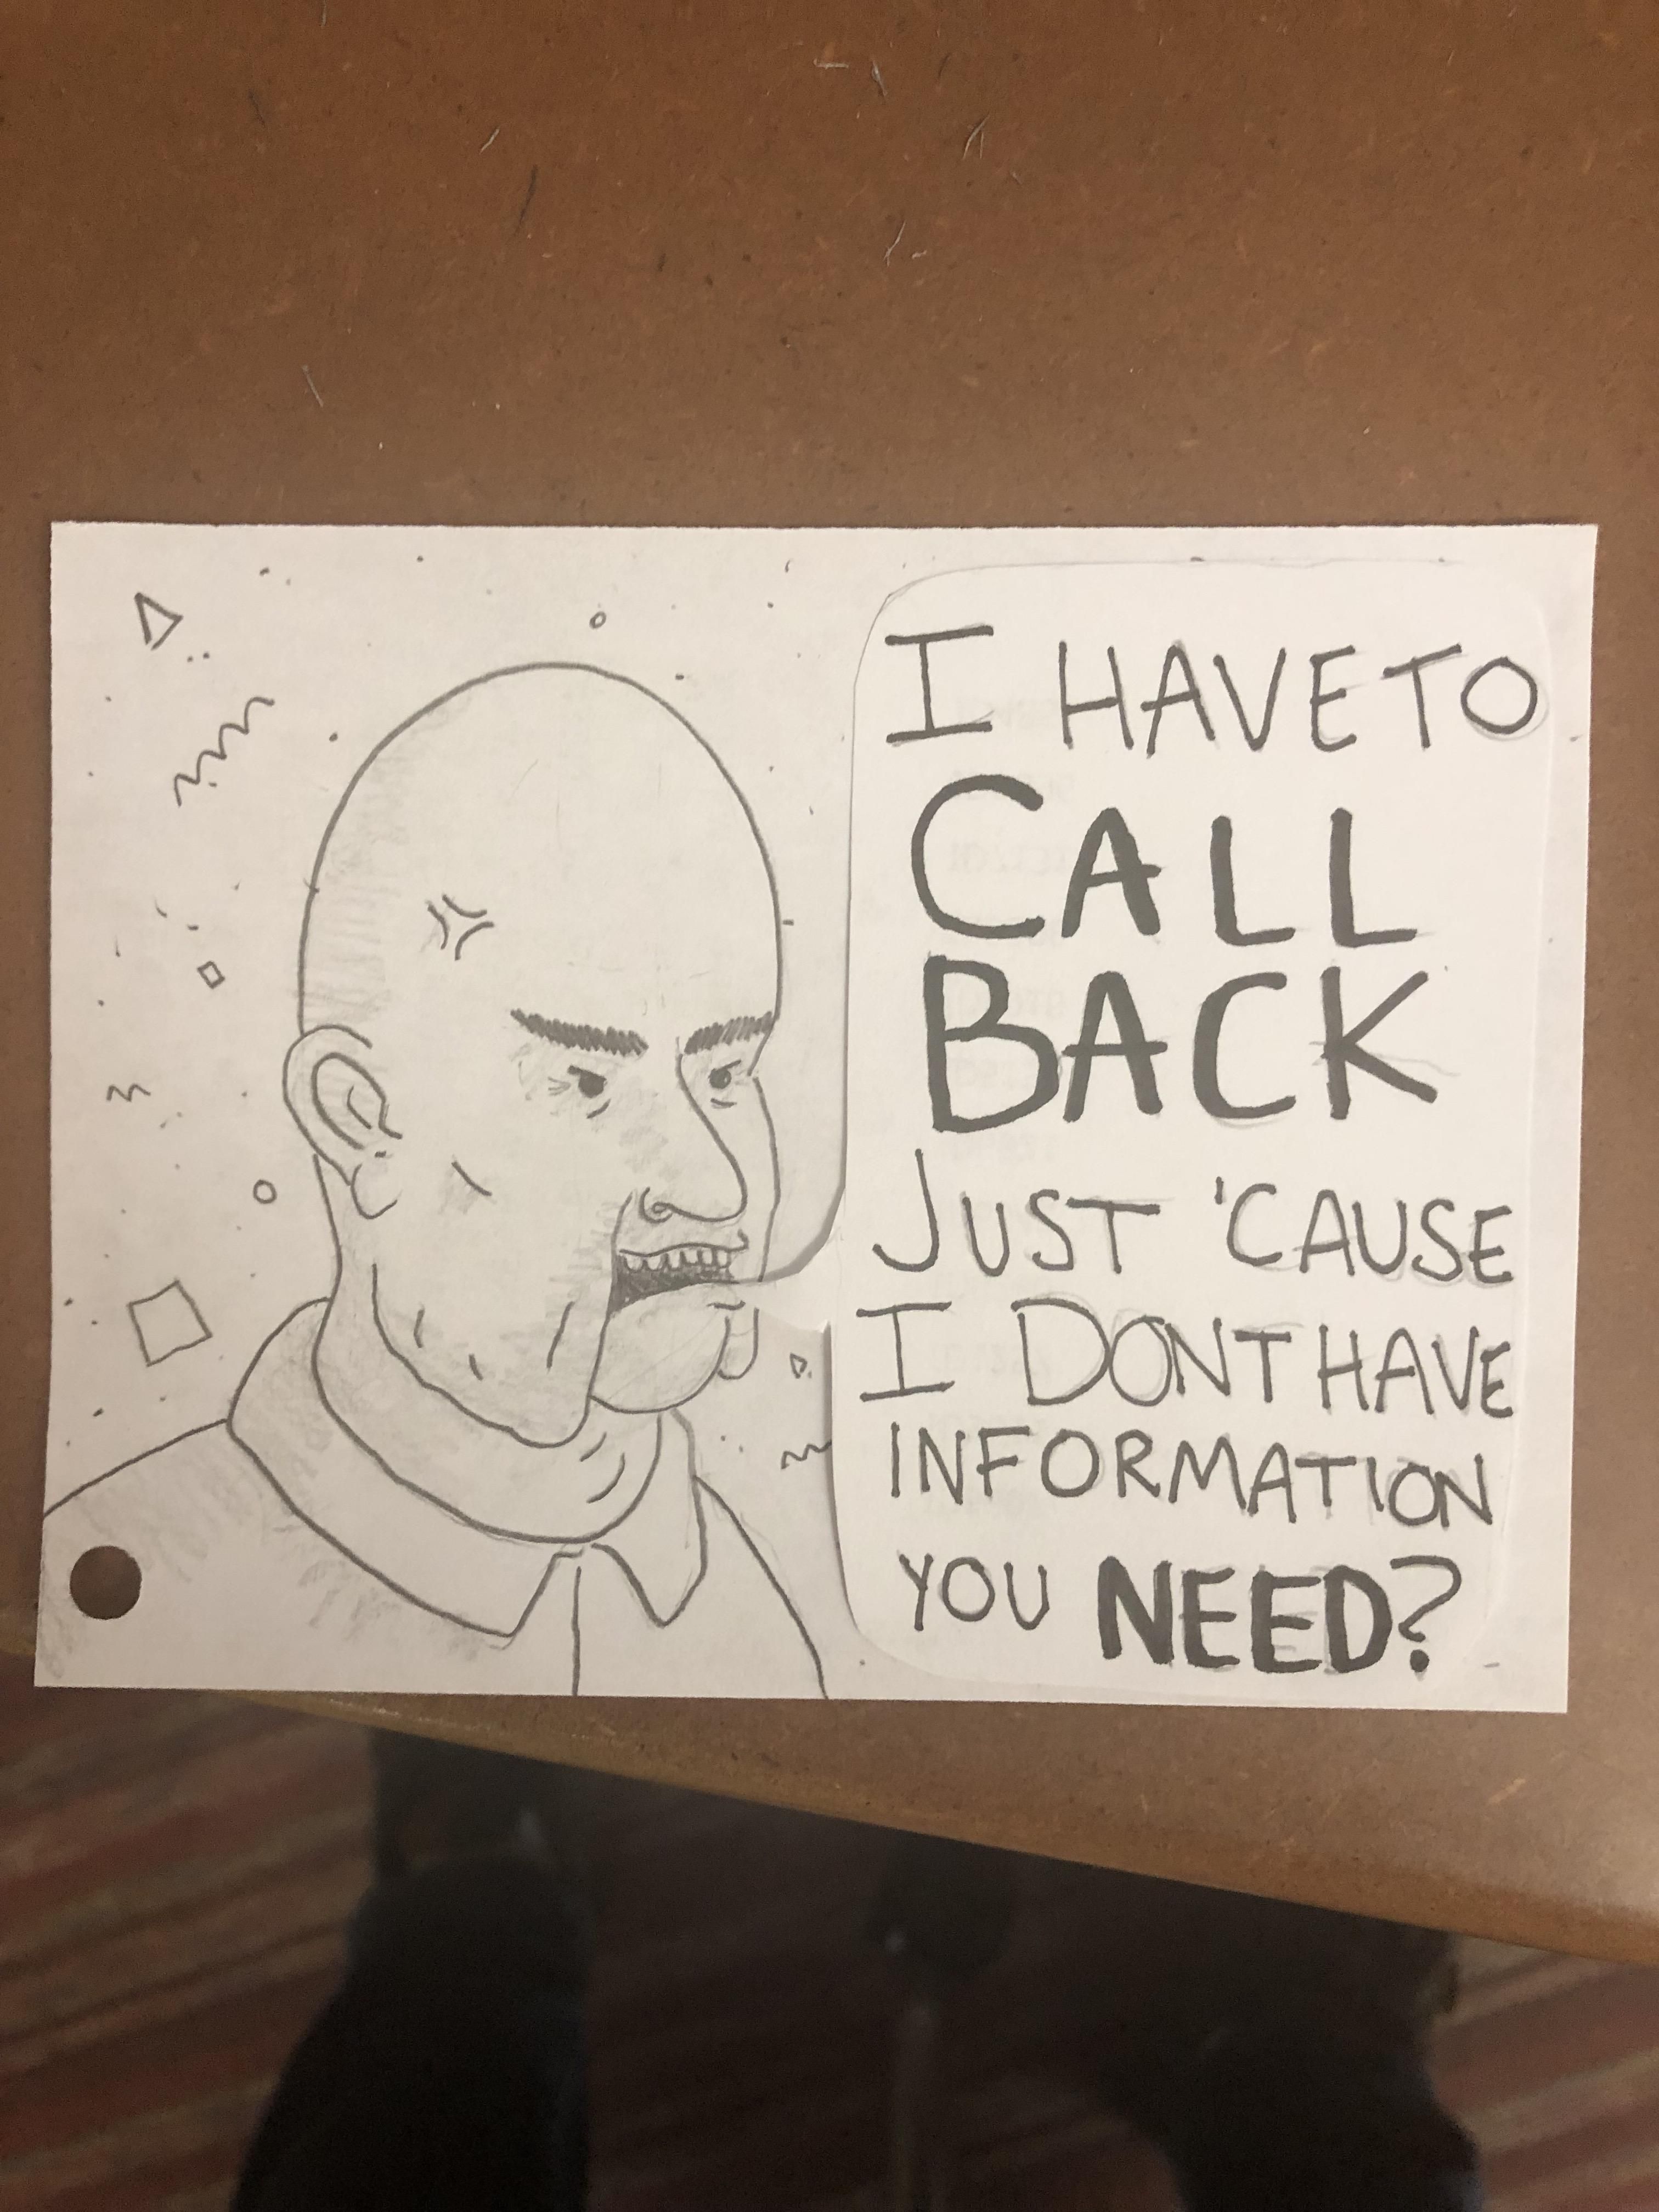 I work at a call center. Sometimes I like to try and draw what my callers look like. Here’s Ed from today: